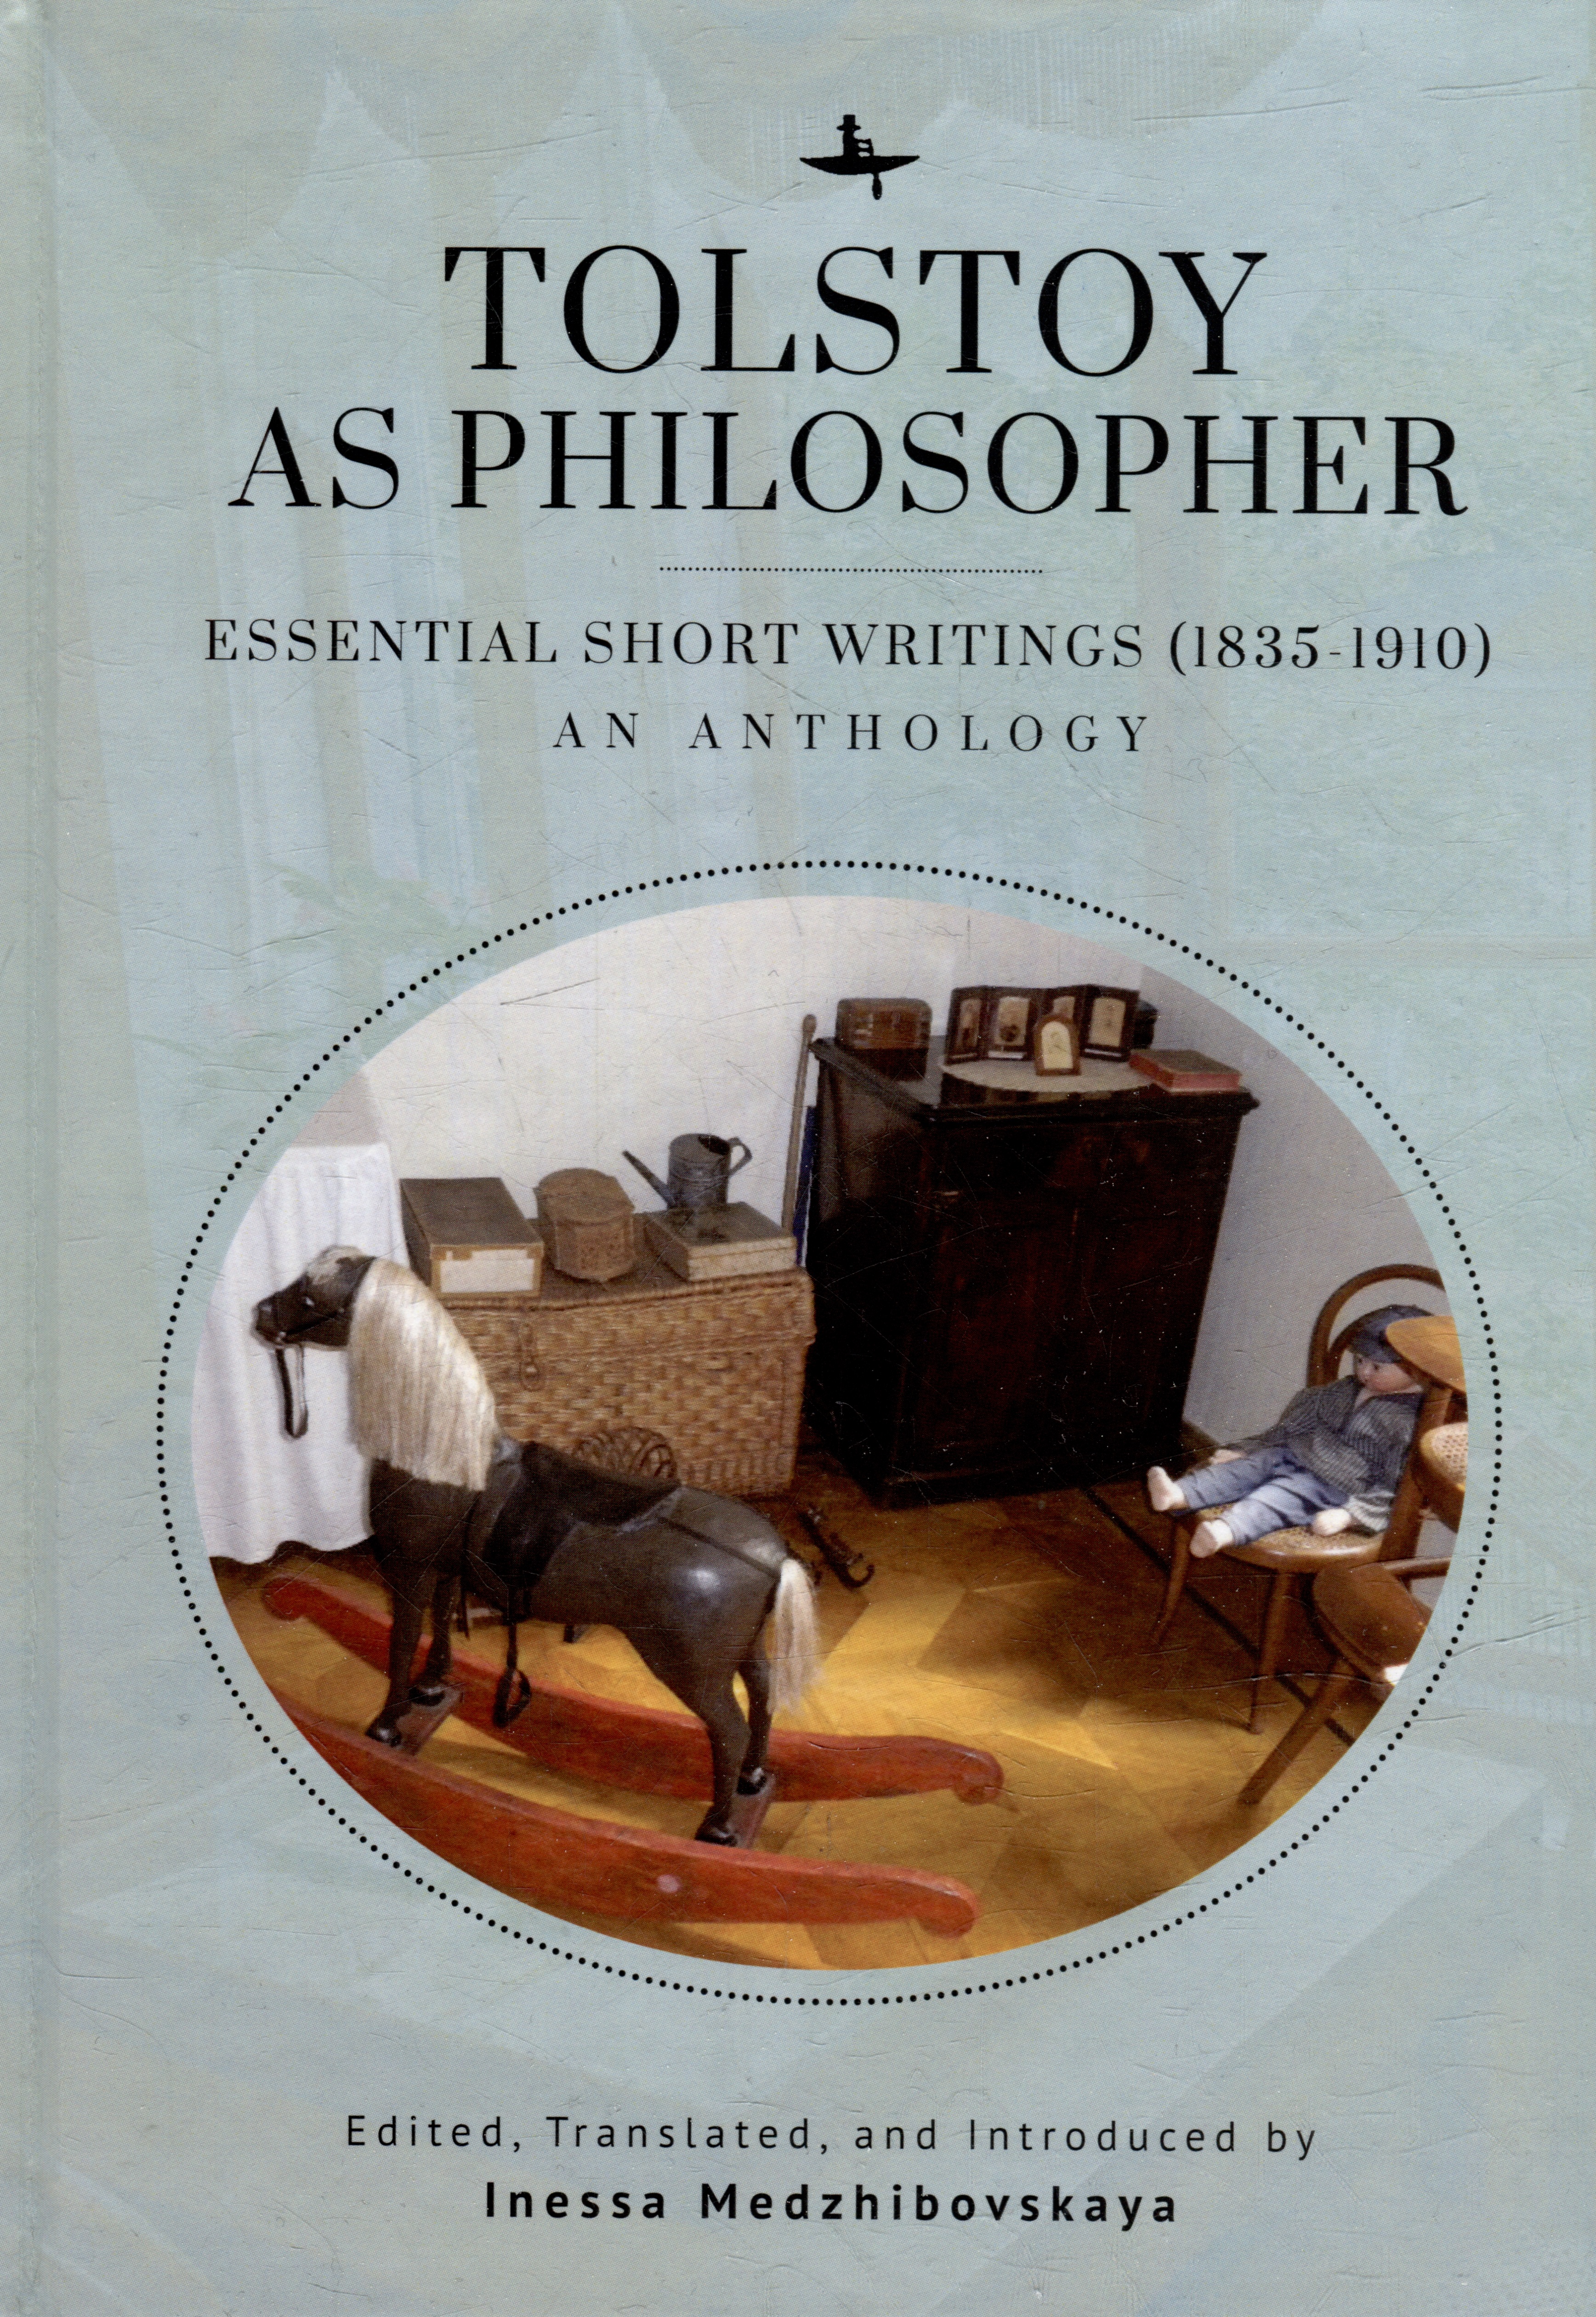 Tolstoy as Philosopher. Essential Short Writings (1835-1910): An Anthology